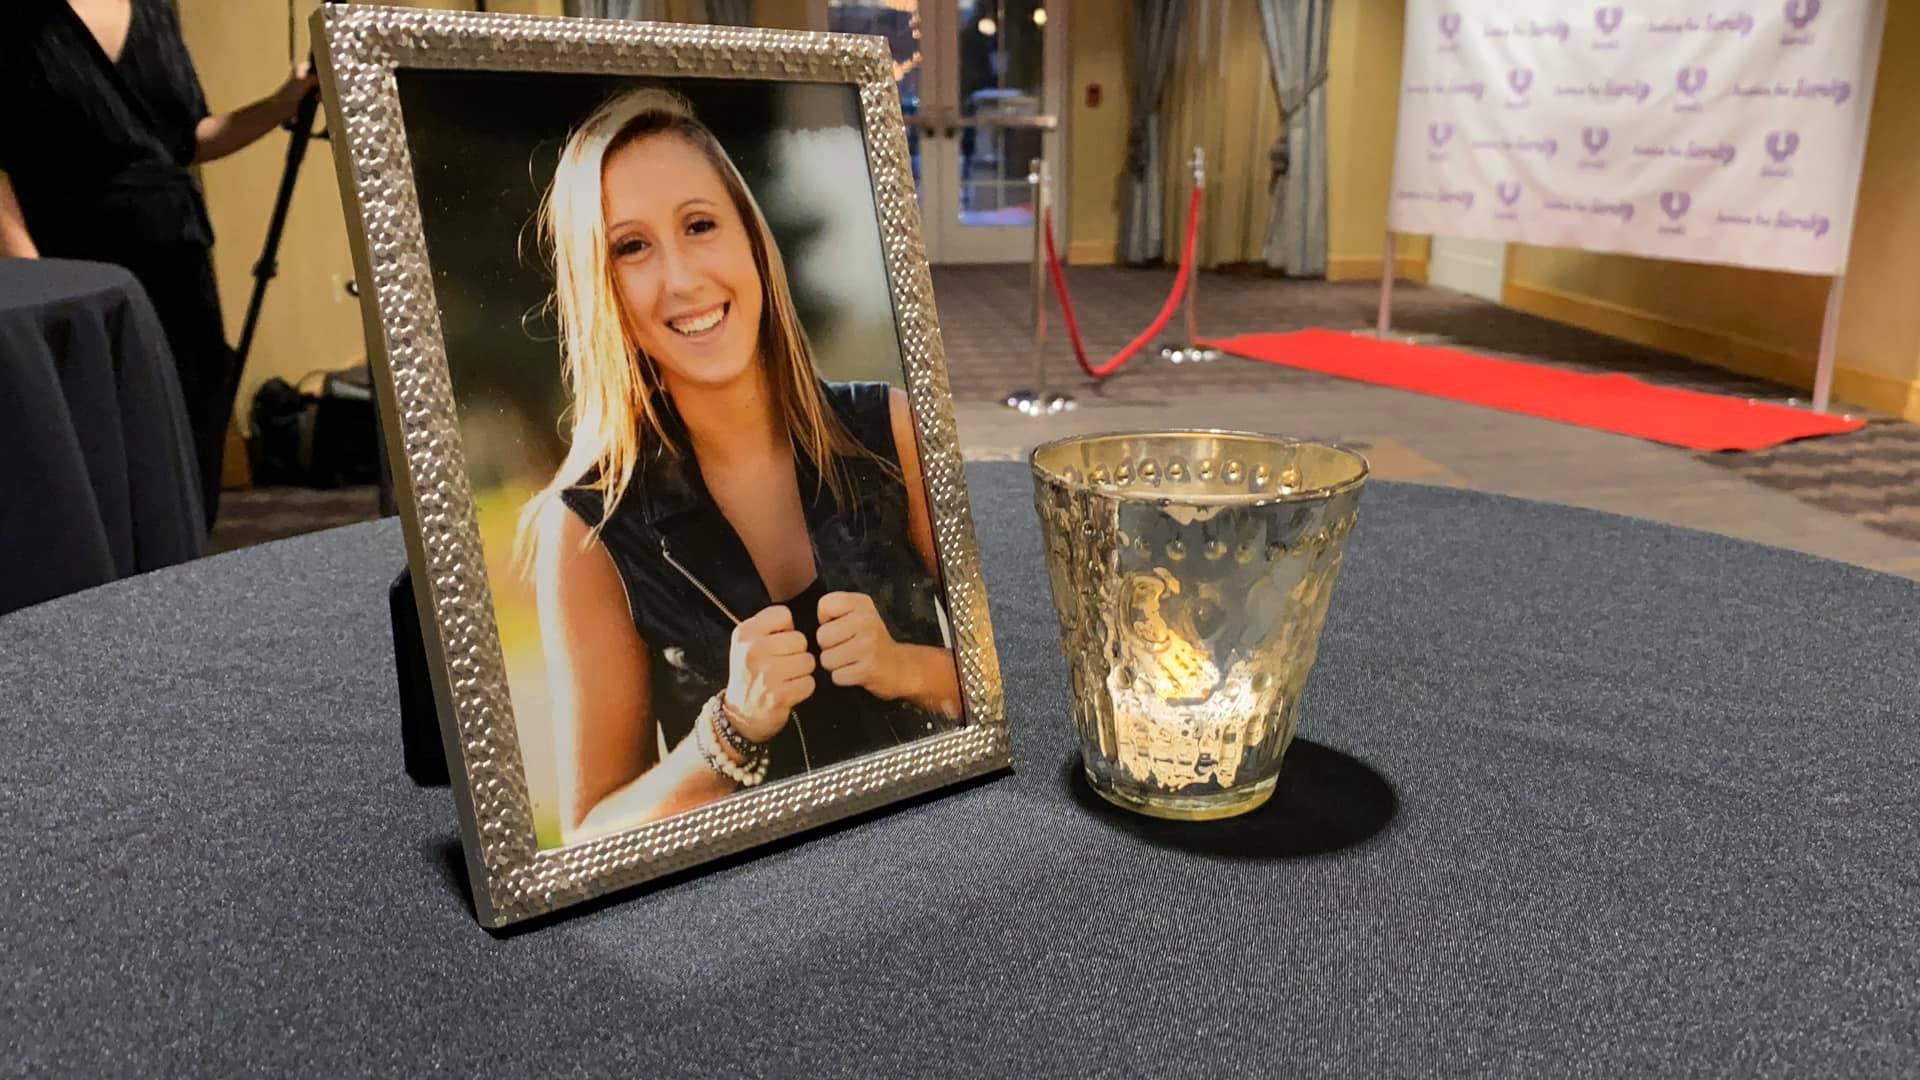 Justice for Sierah held a birthday event Saturday, honoring her life and pushing for self-defense classes to be implemented into the curriculum for Ohio schools